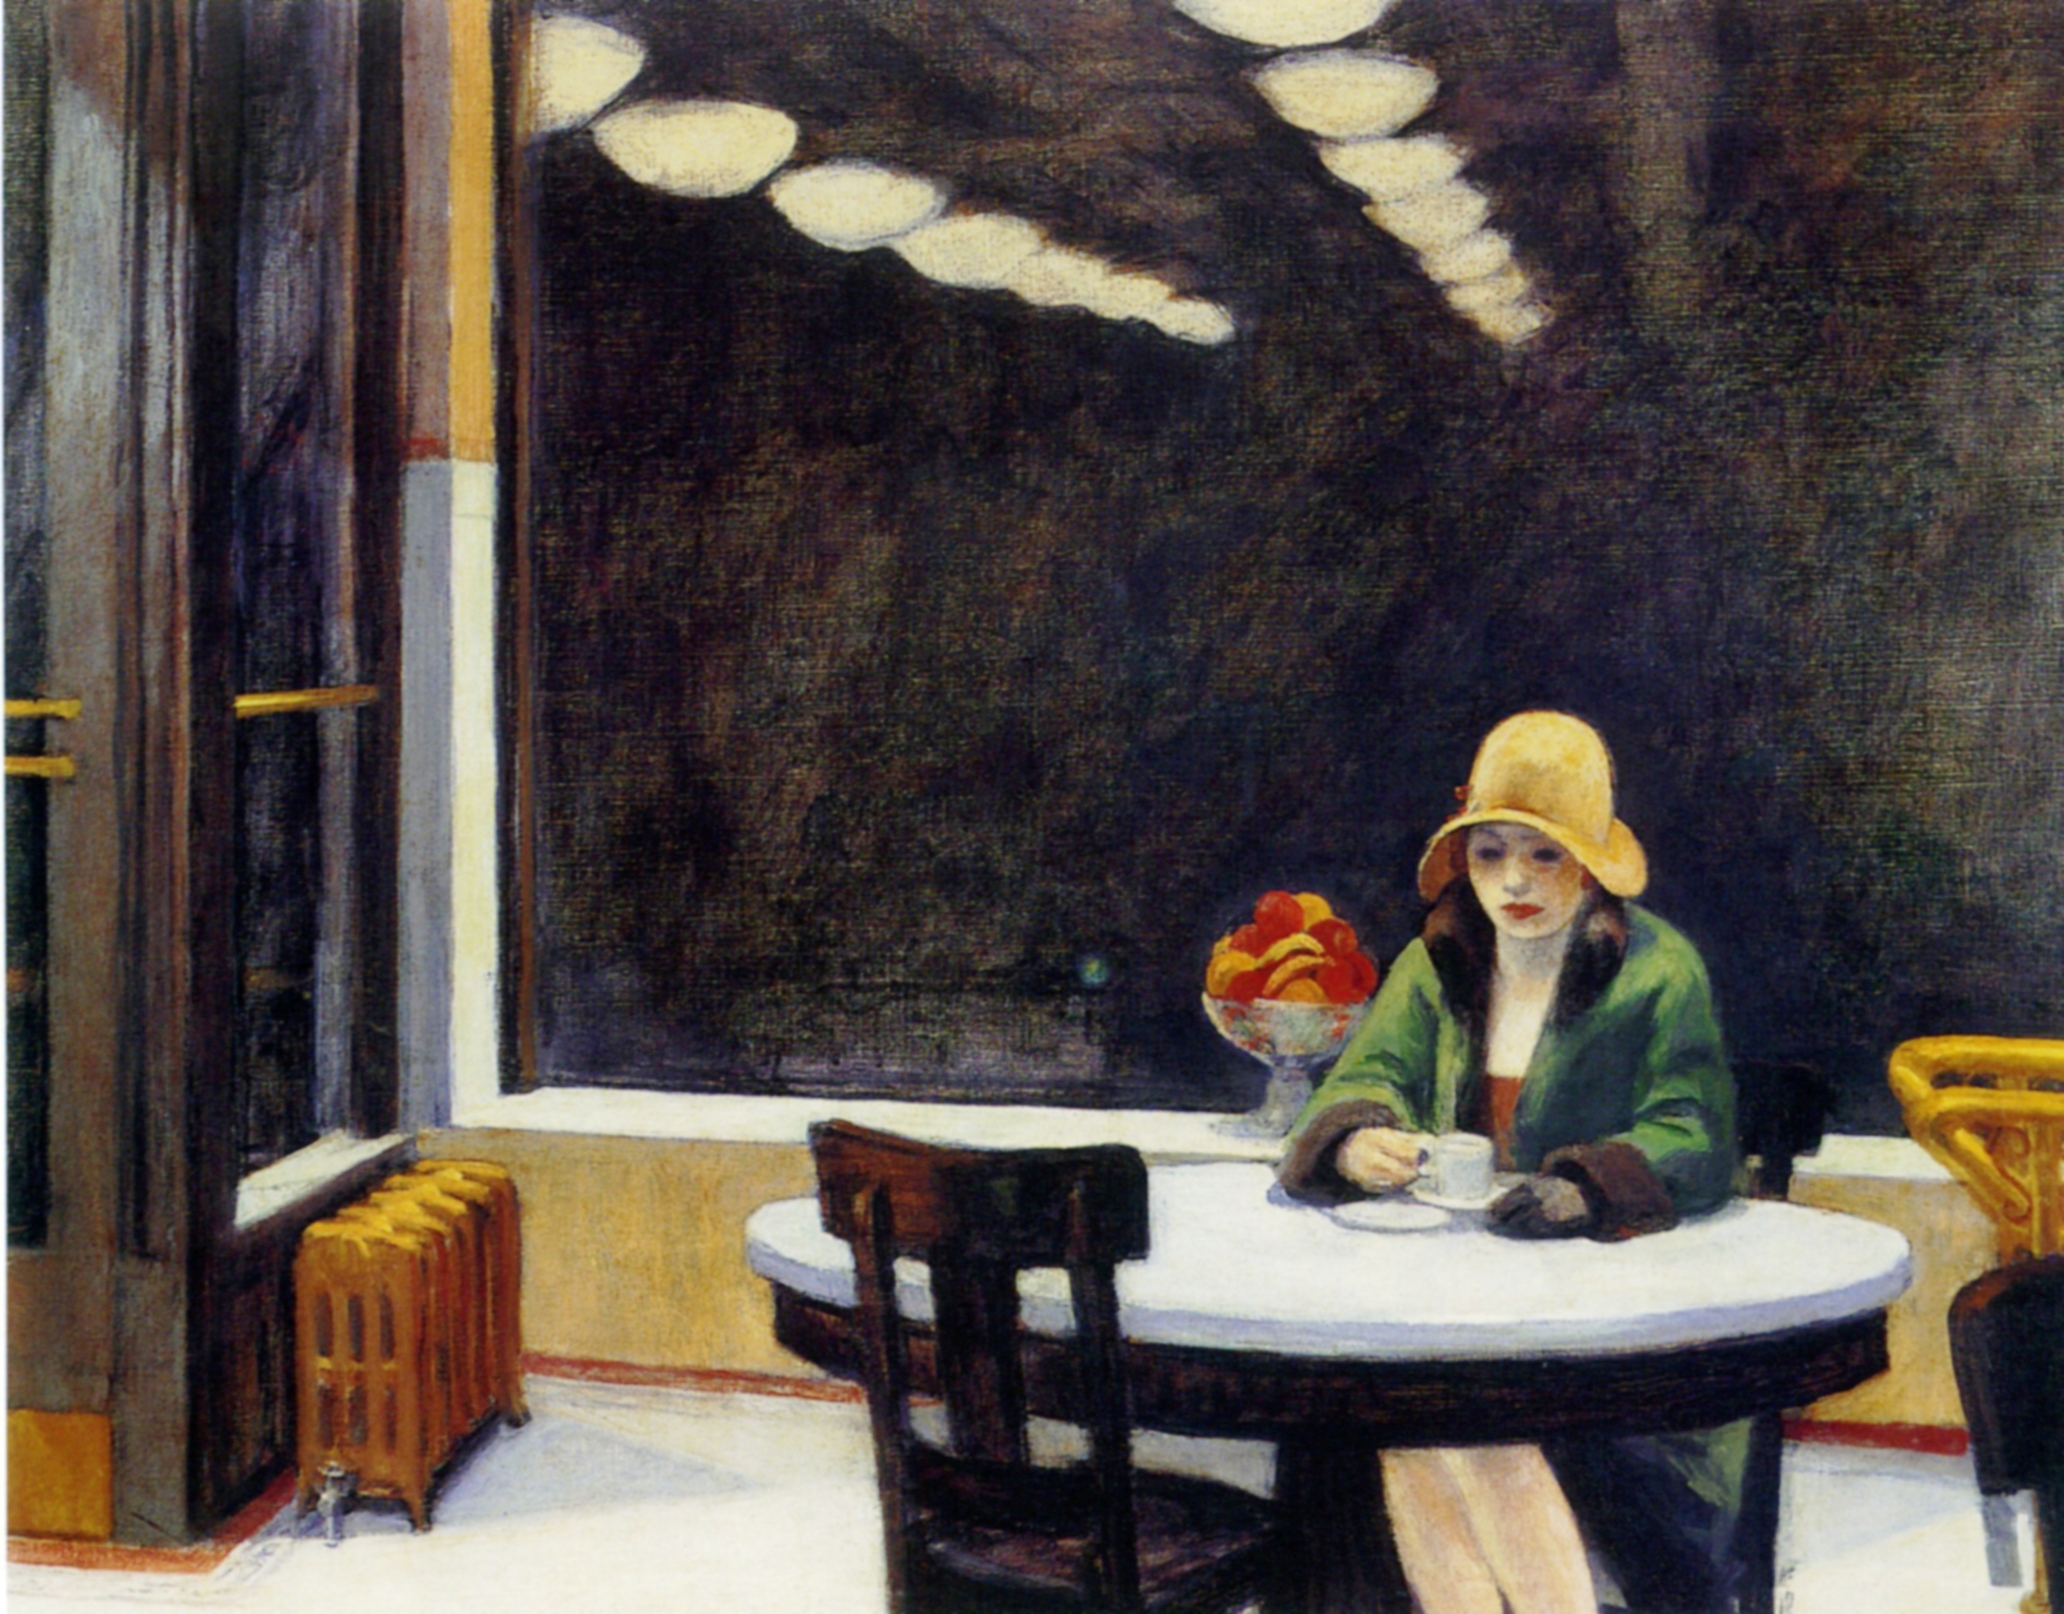 automat painting by Edward Hopper